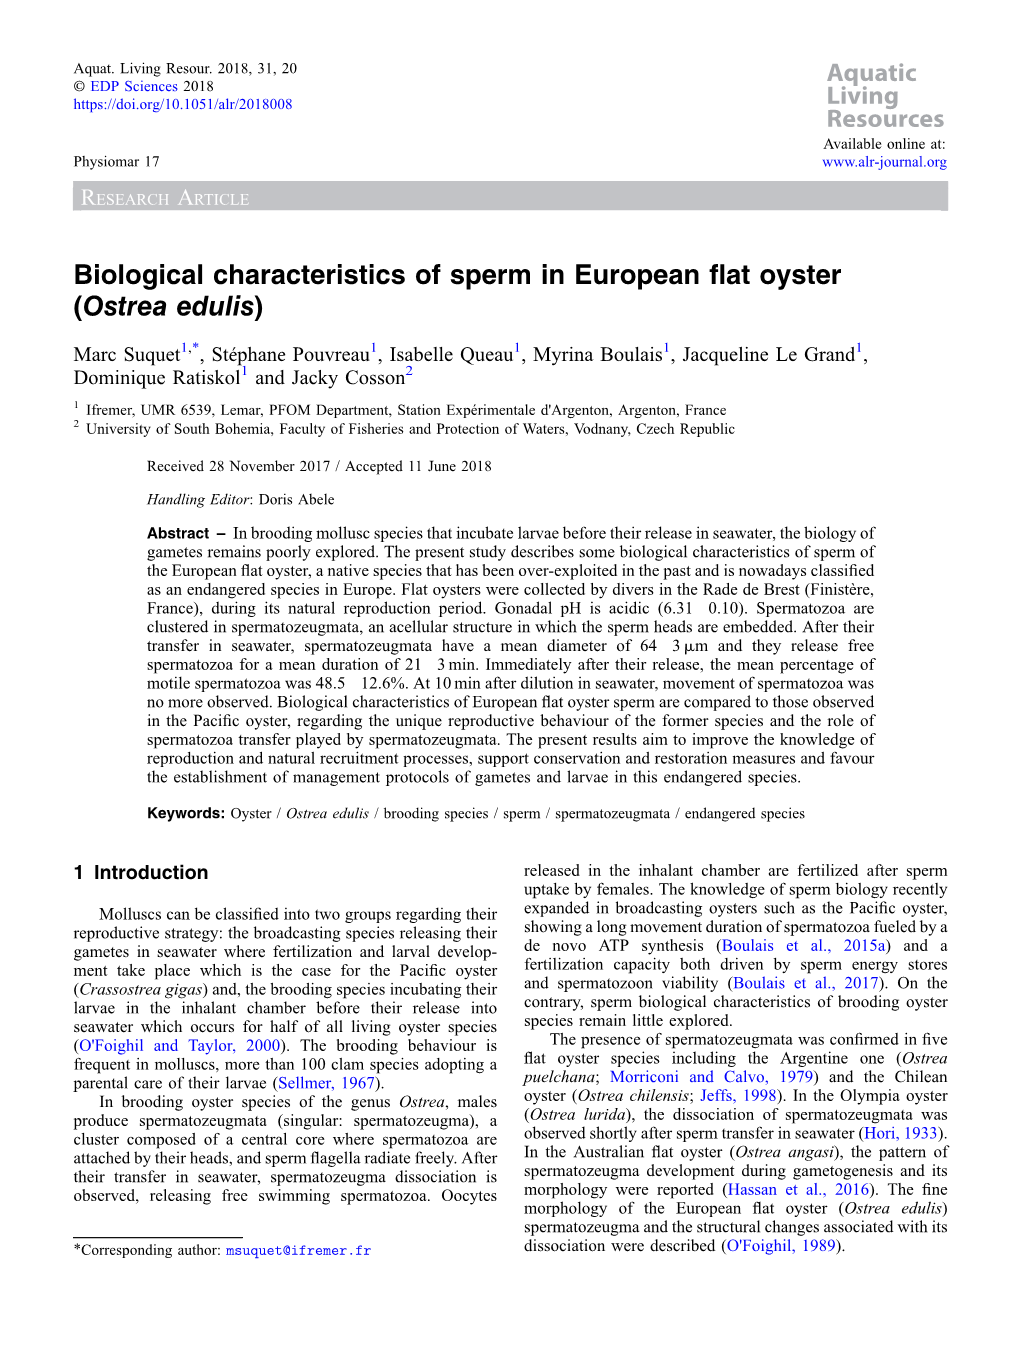 Biological Characteristics of Sperm in European Flat Oyster